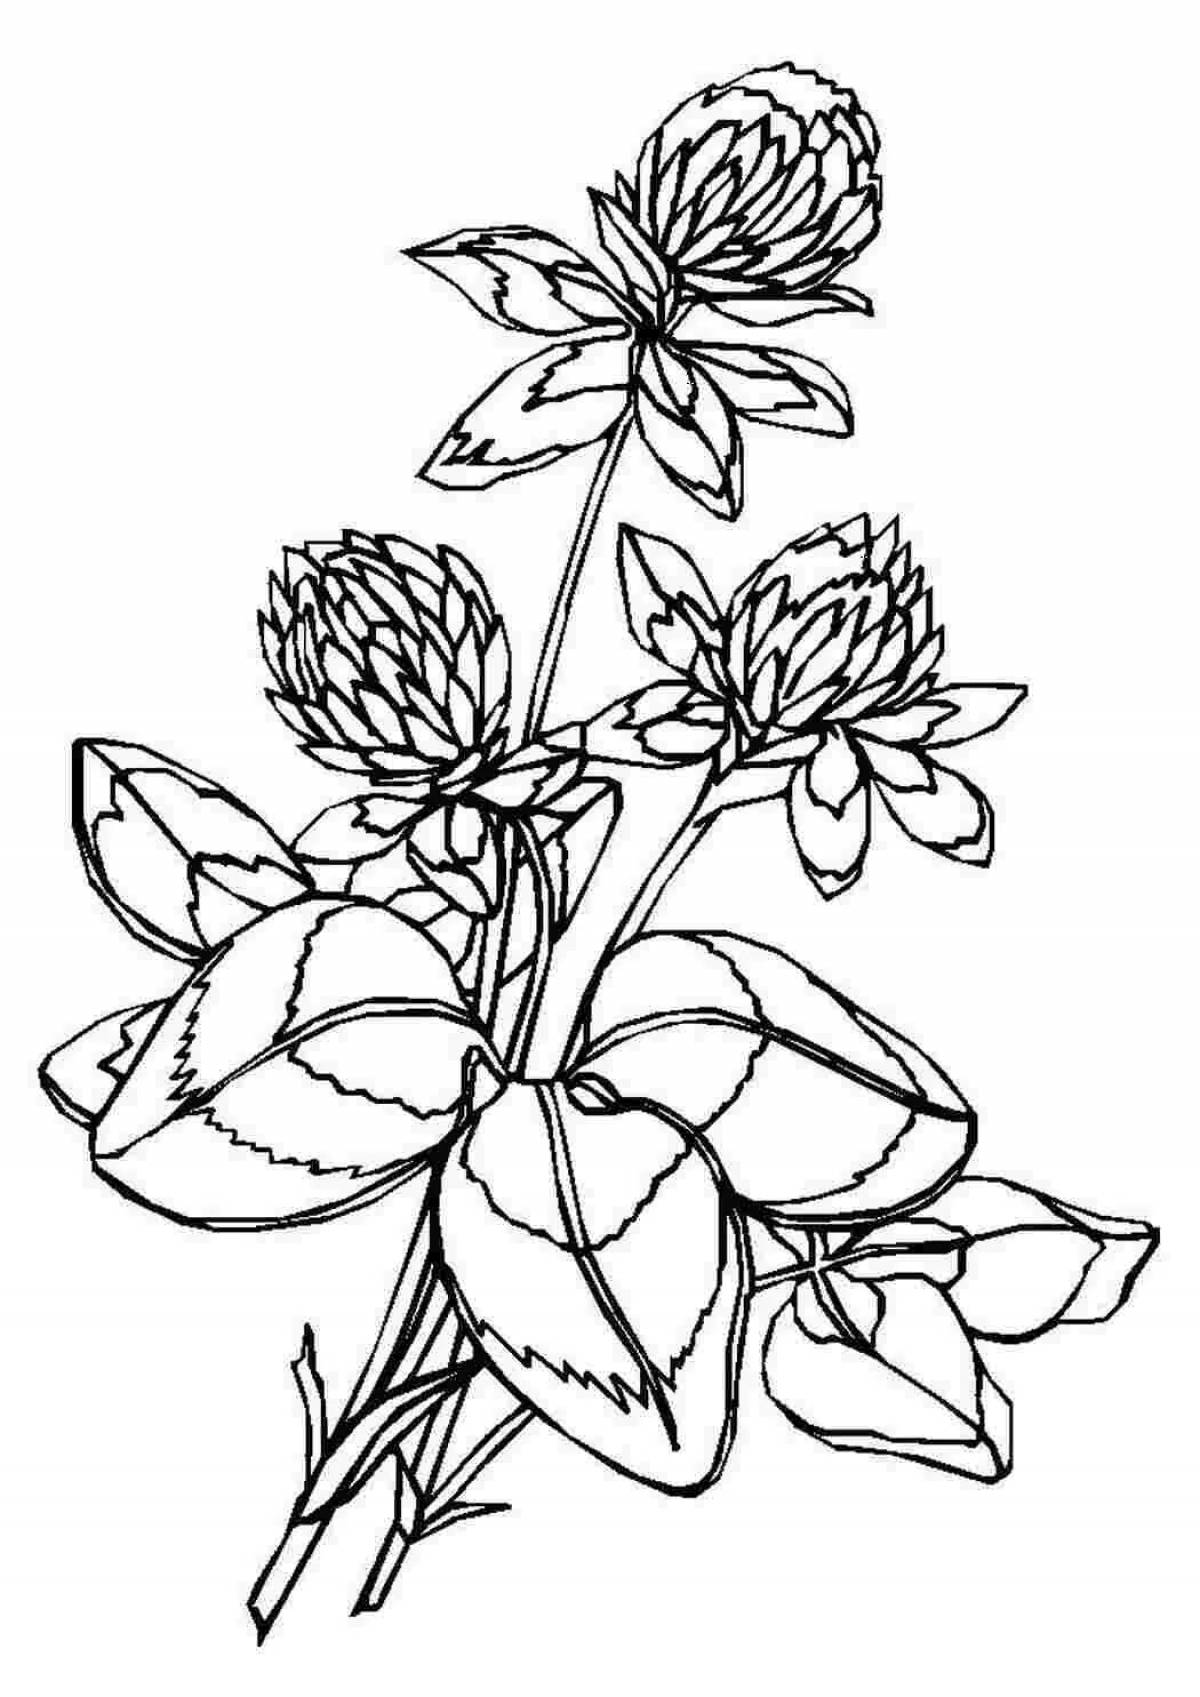 Creative coloring pages of medicinal plants for preschoolers